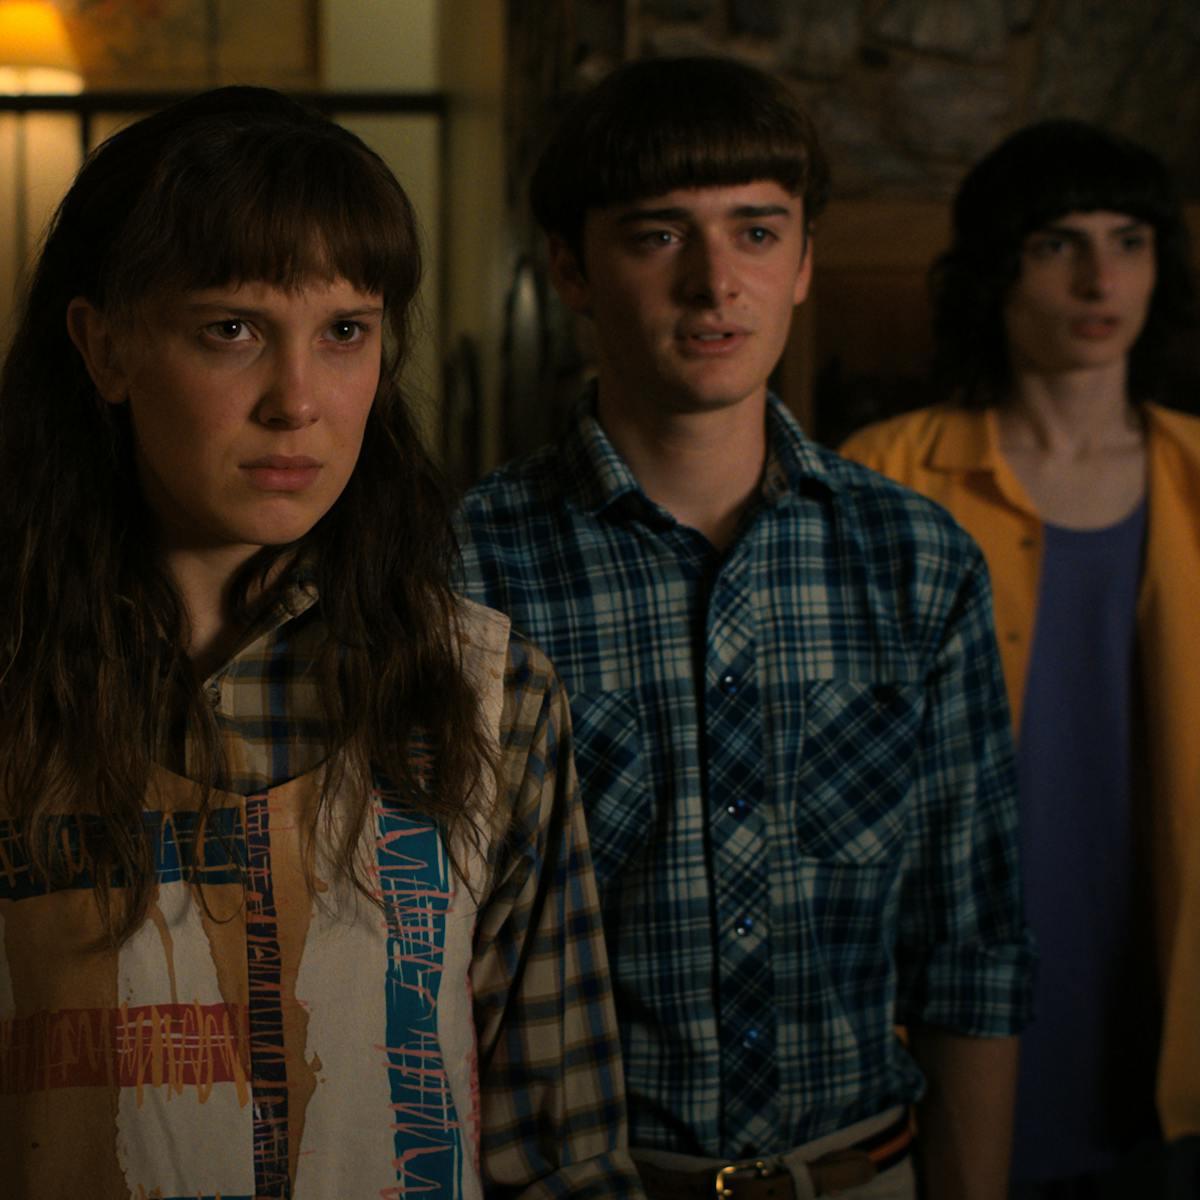 Eduardo Franco, Charlie Heaton, Millie Bobby Brown, Noah Schnapp, and Finn Wolfhard stand in a 'V' facing the camera. Franco wears a backwards blue hat, Heaton wears a grey t-shirt and flannel, Brown wears a flannel and a vest, Schnapp wears a flannel shirt, and Wolfhard wears an orange shirt over a navy tee. 